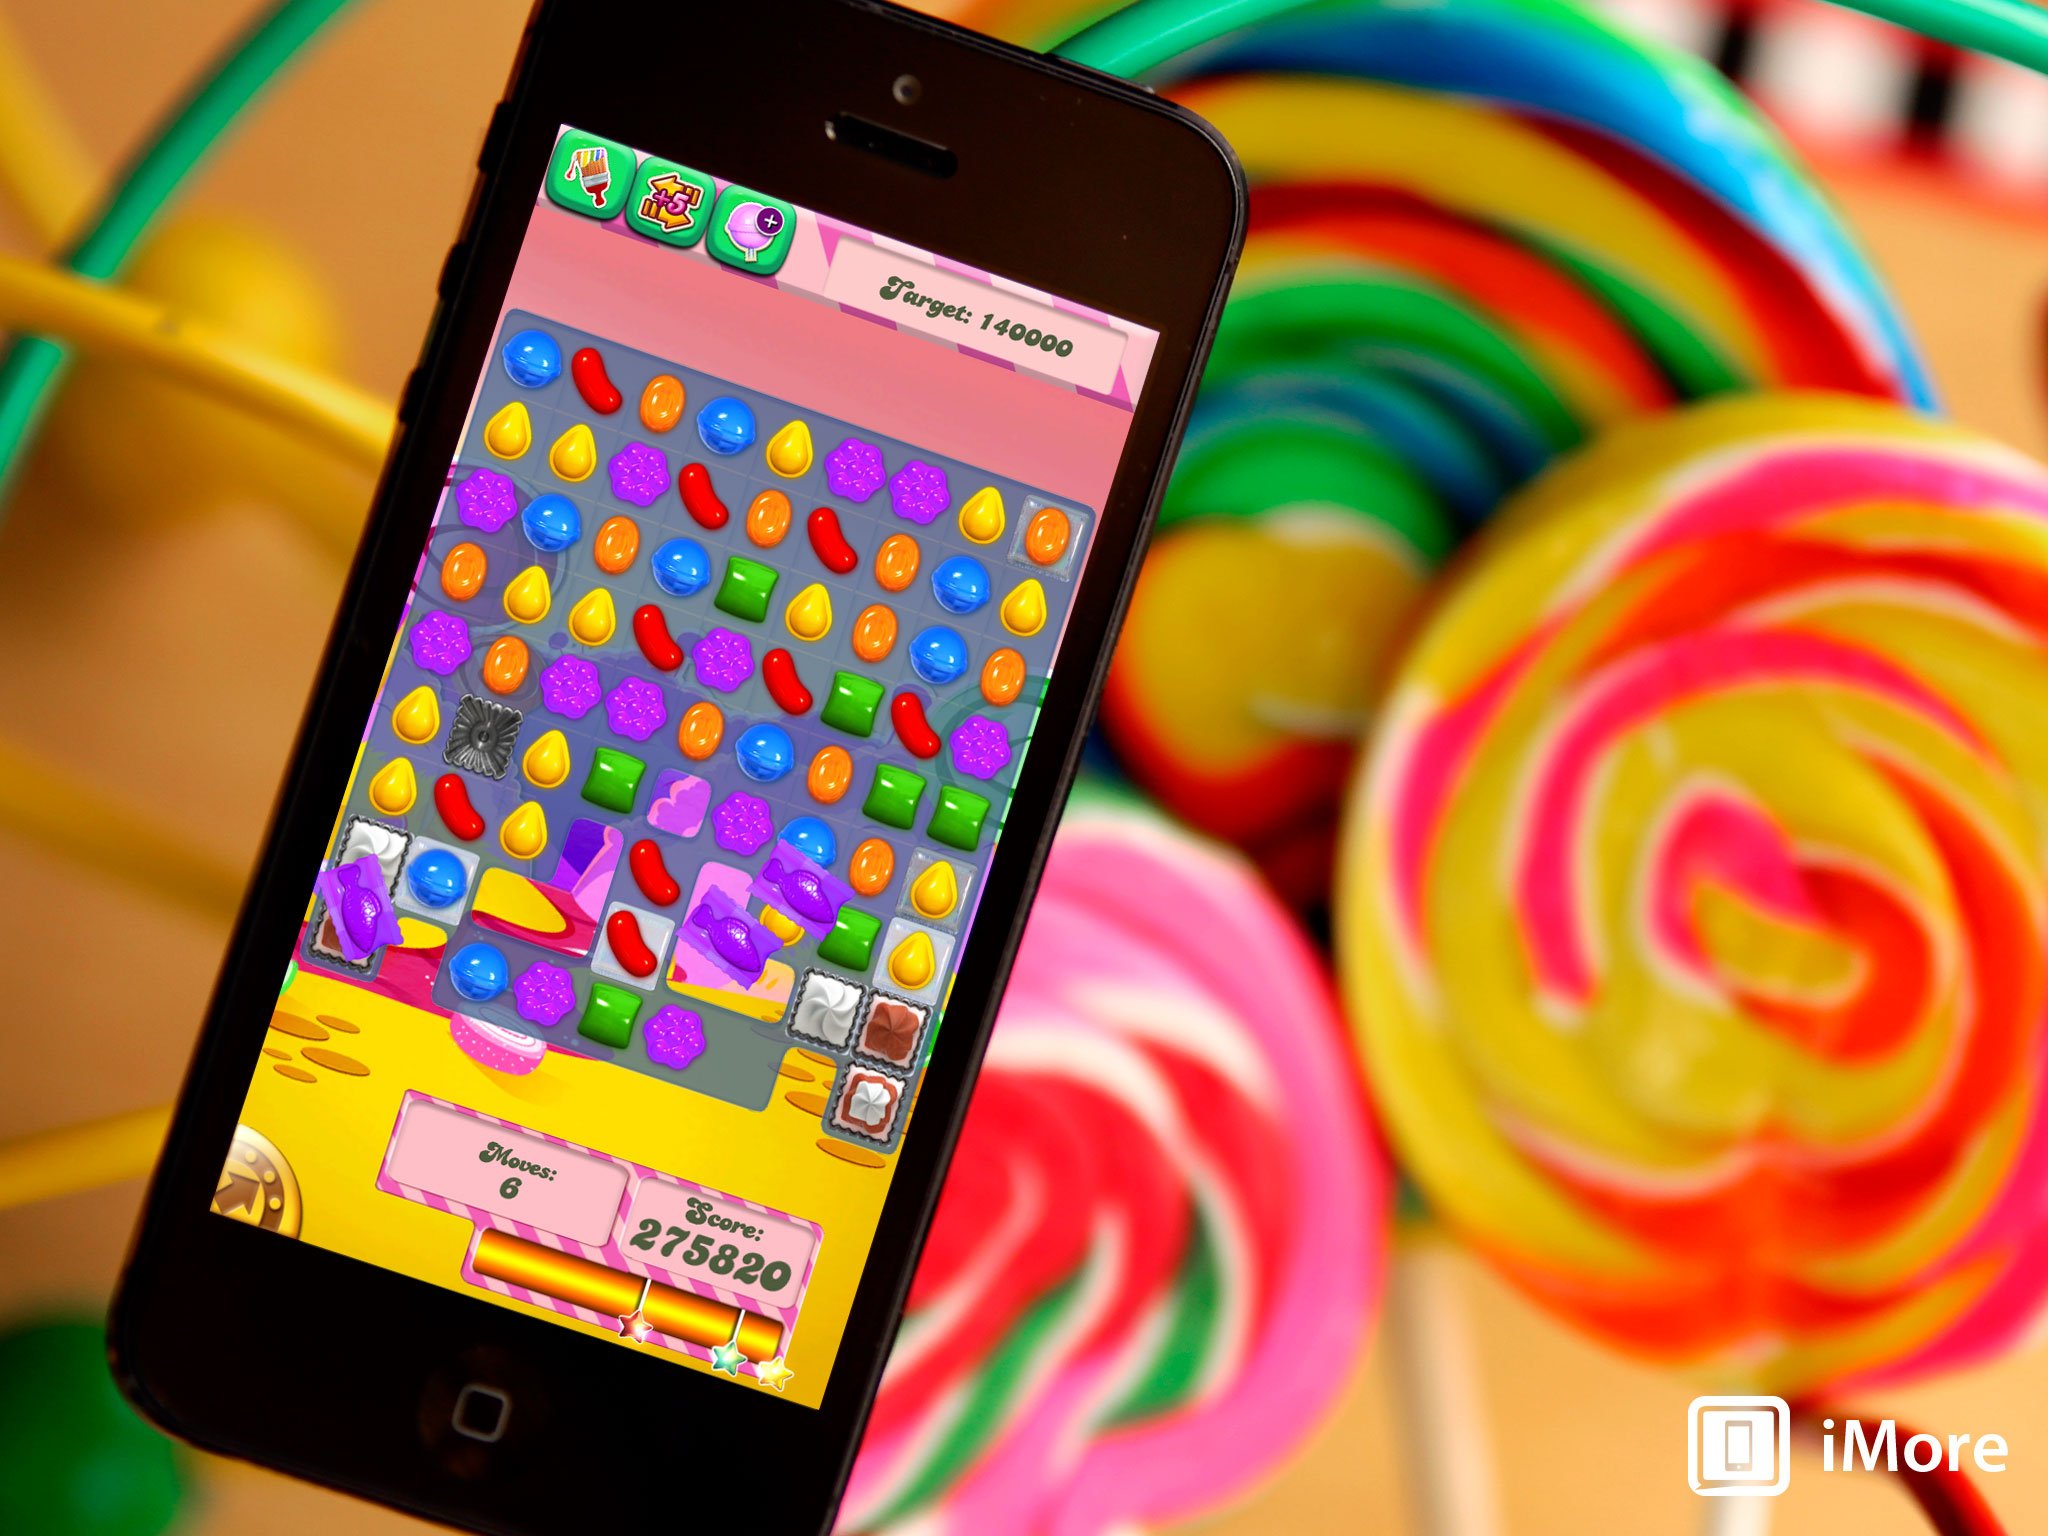 Download Candy Crush Saga Game for PC Windows 7,8,10 and Mac